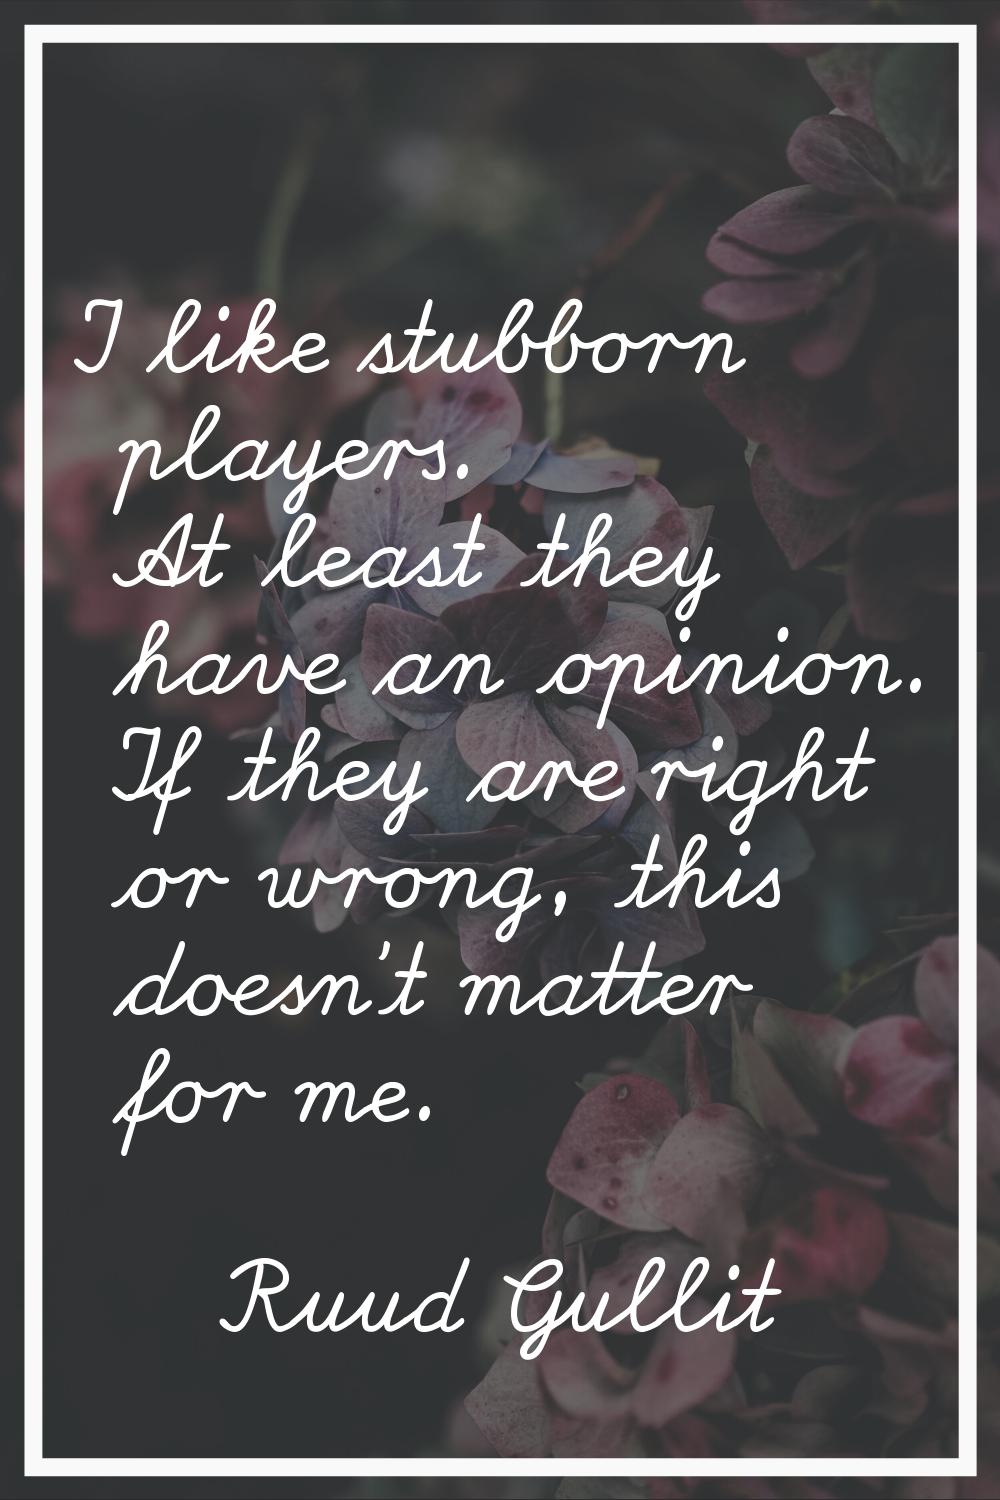 I like stubborn players. At least they have an opinion. If they are right or wrong, this doesn't ma